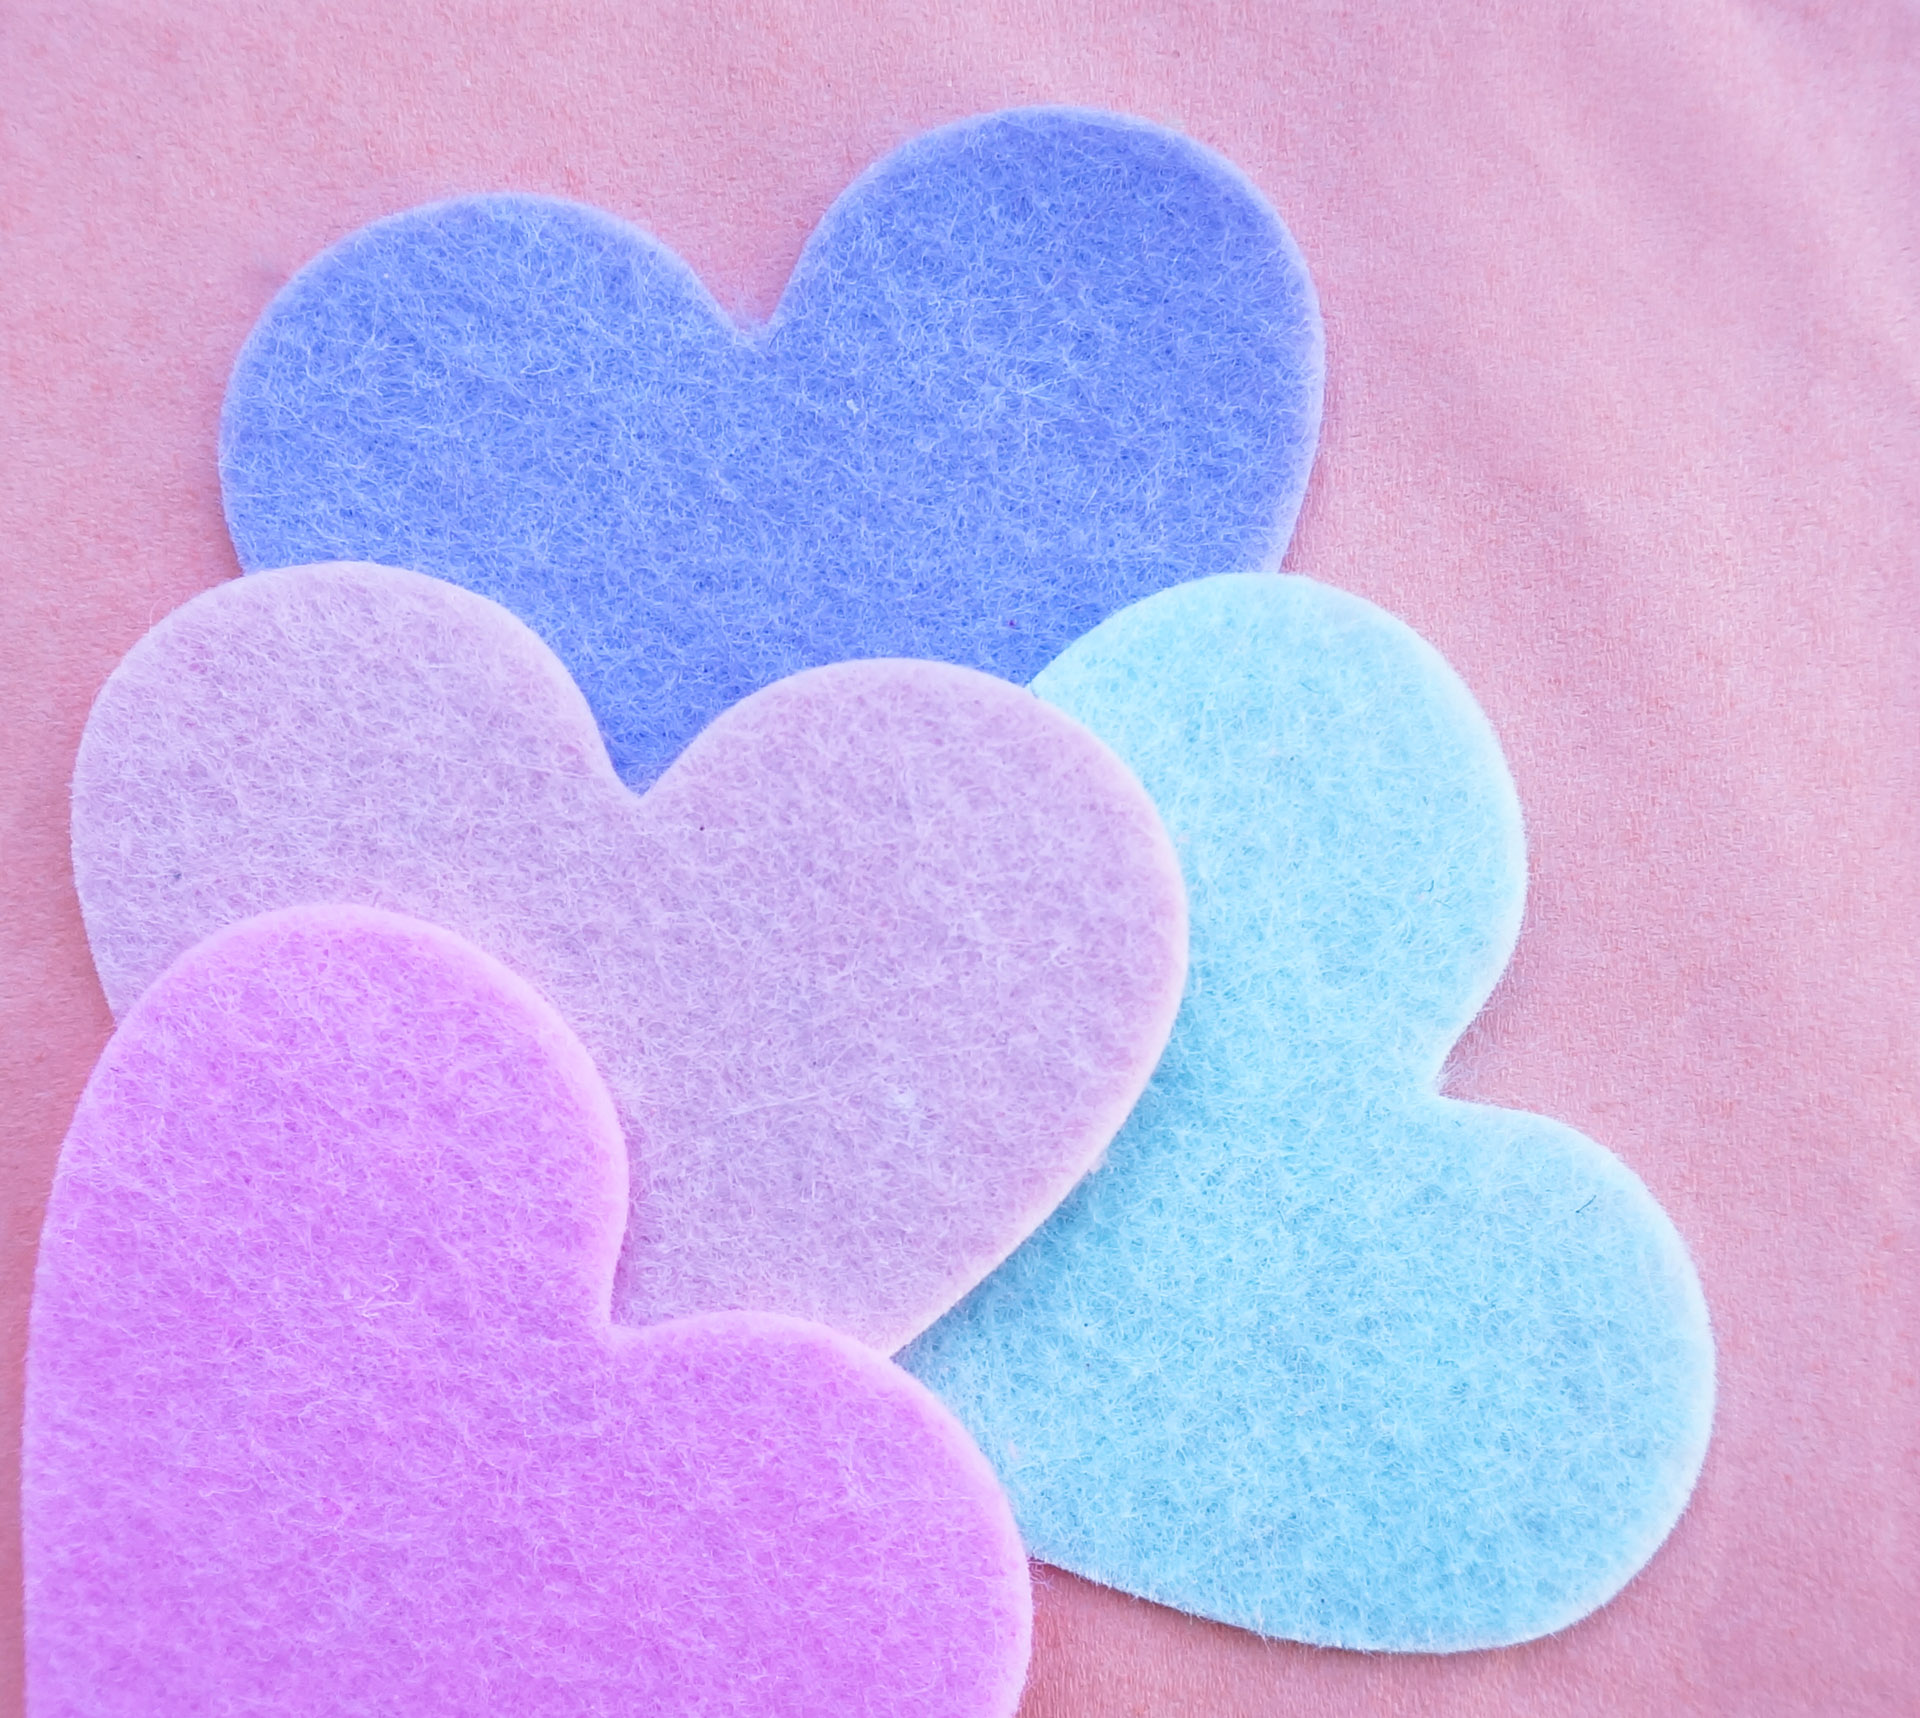 Felt hearts add style and charm